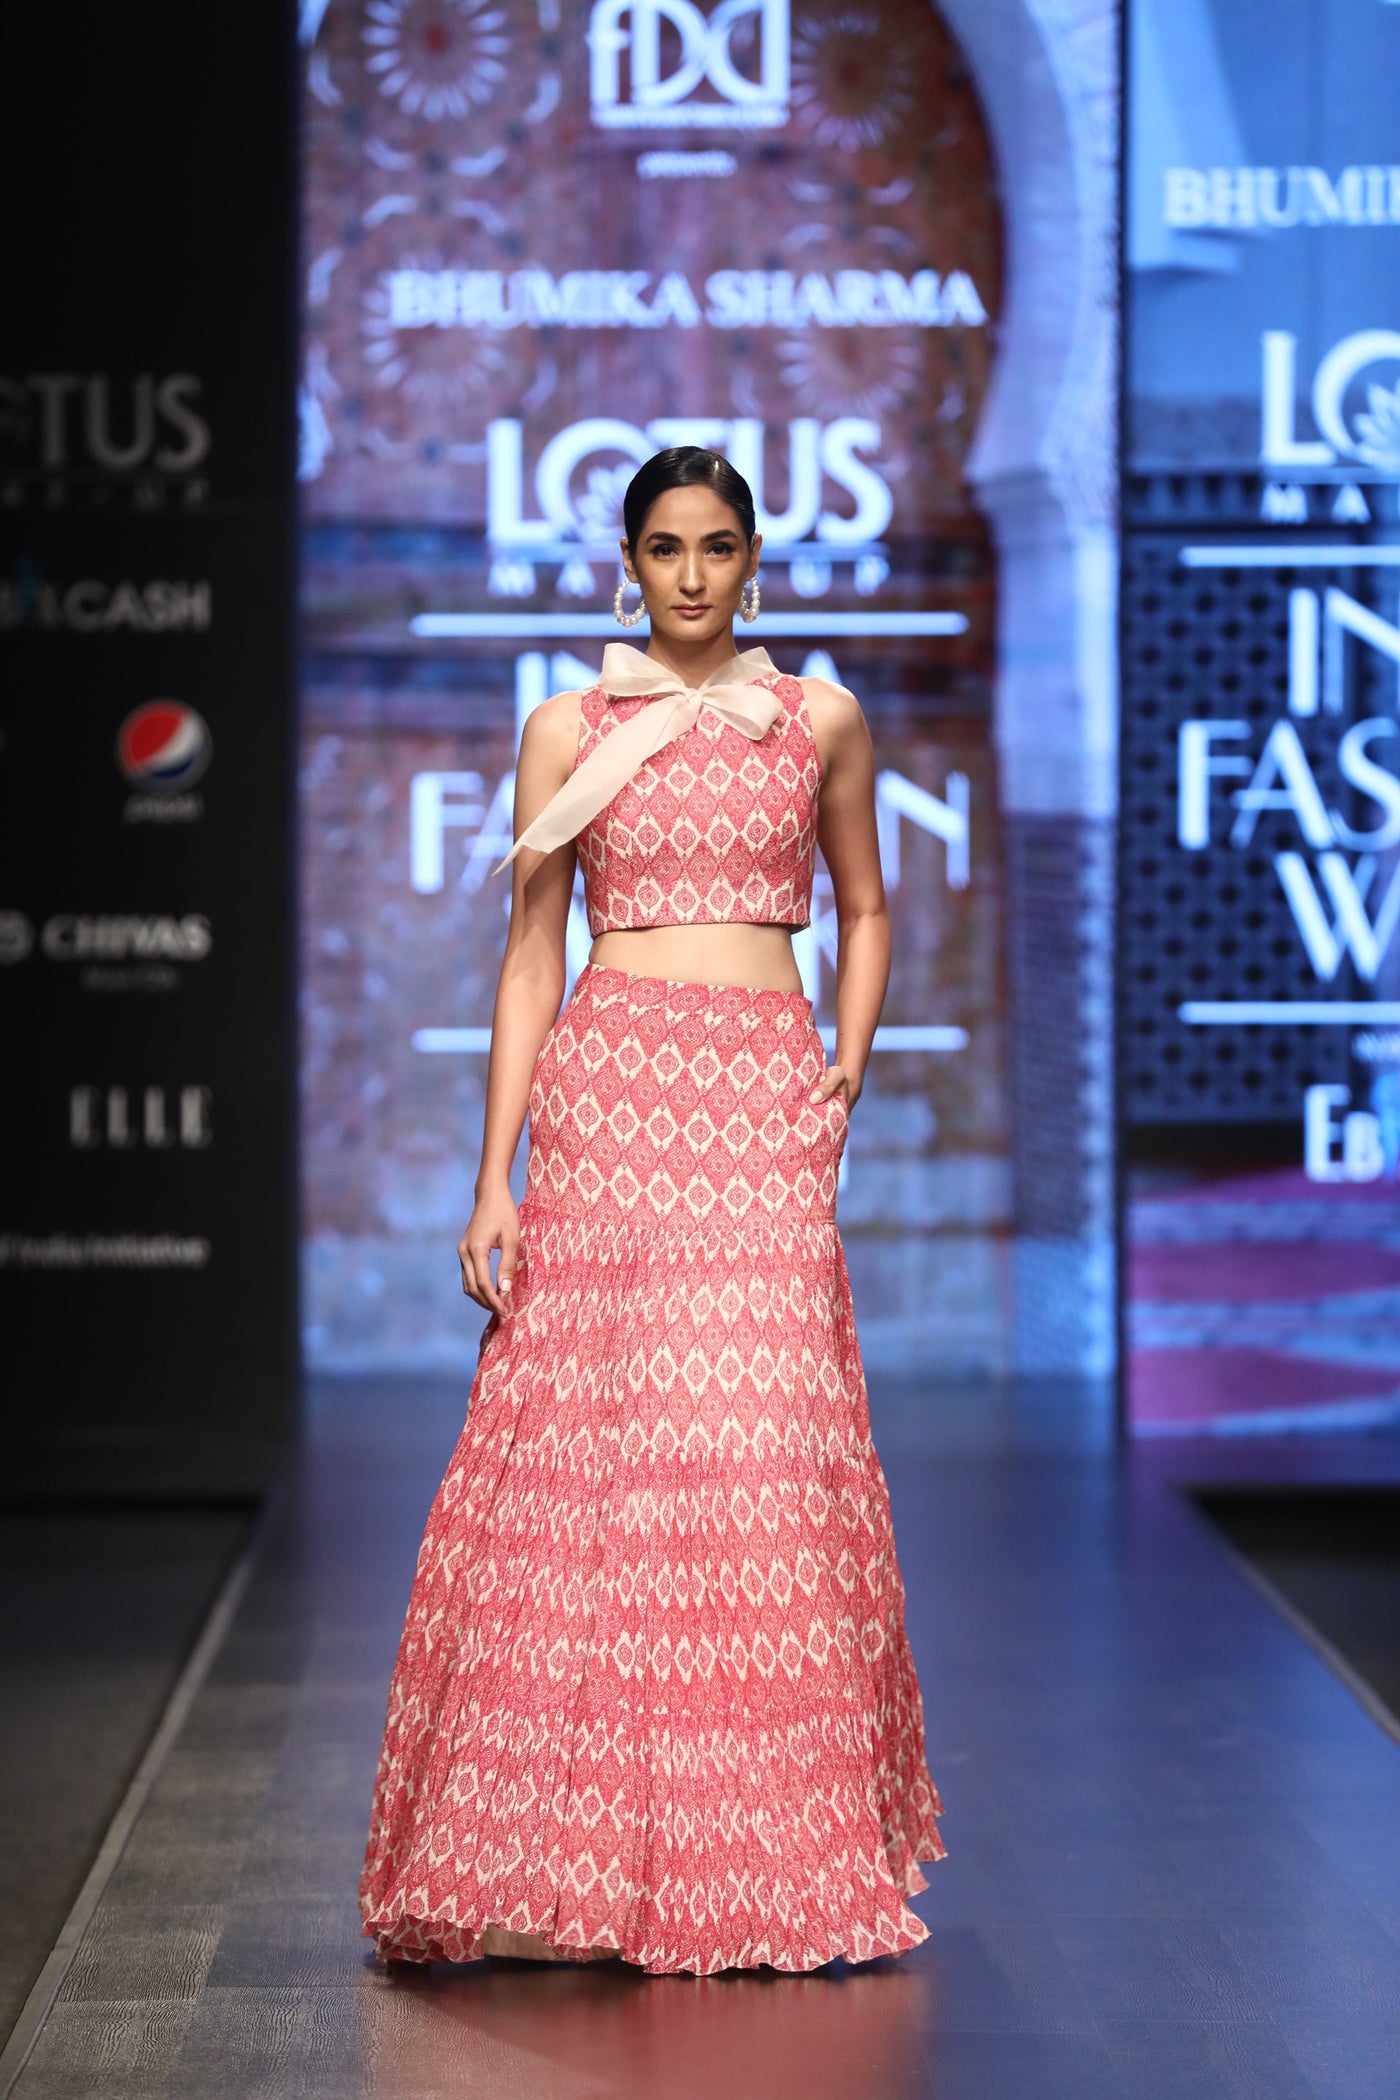 A Printed Crop Top With An Organza Bow Neck & A Printed Pleated Skirt - BHUMIKA SHARMA